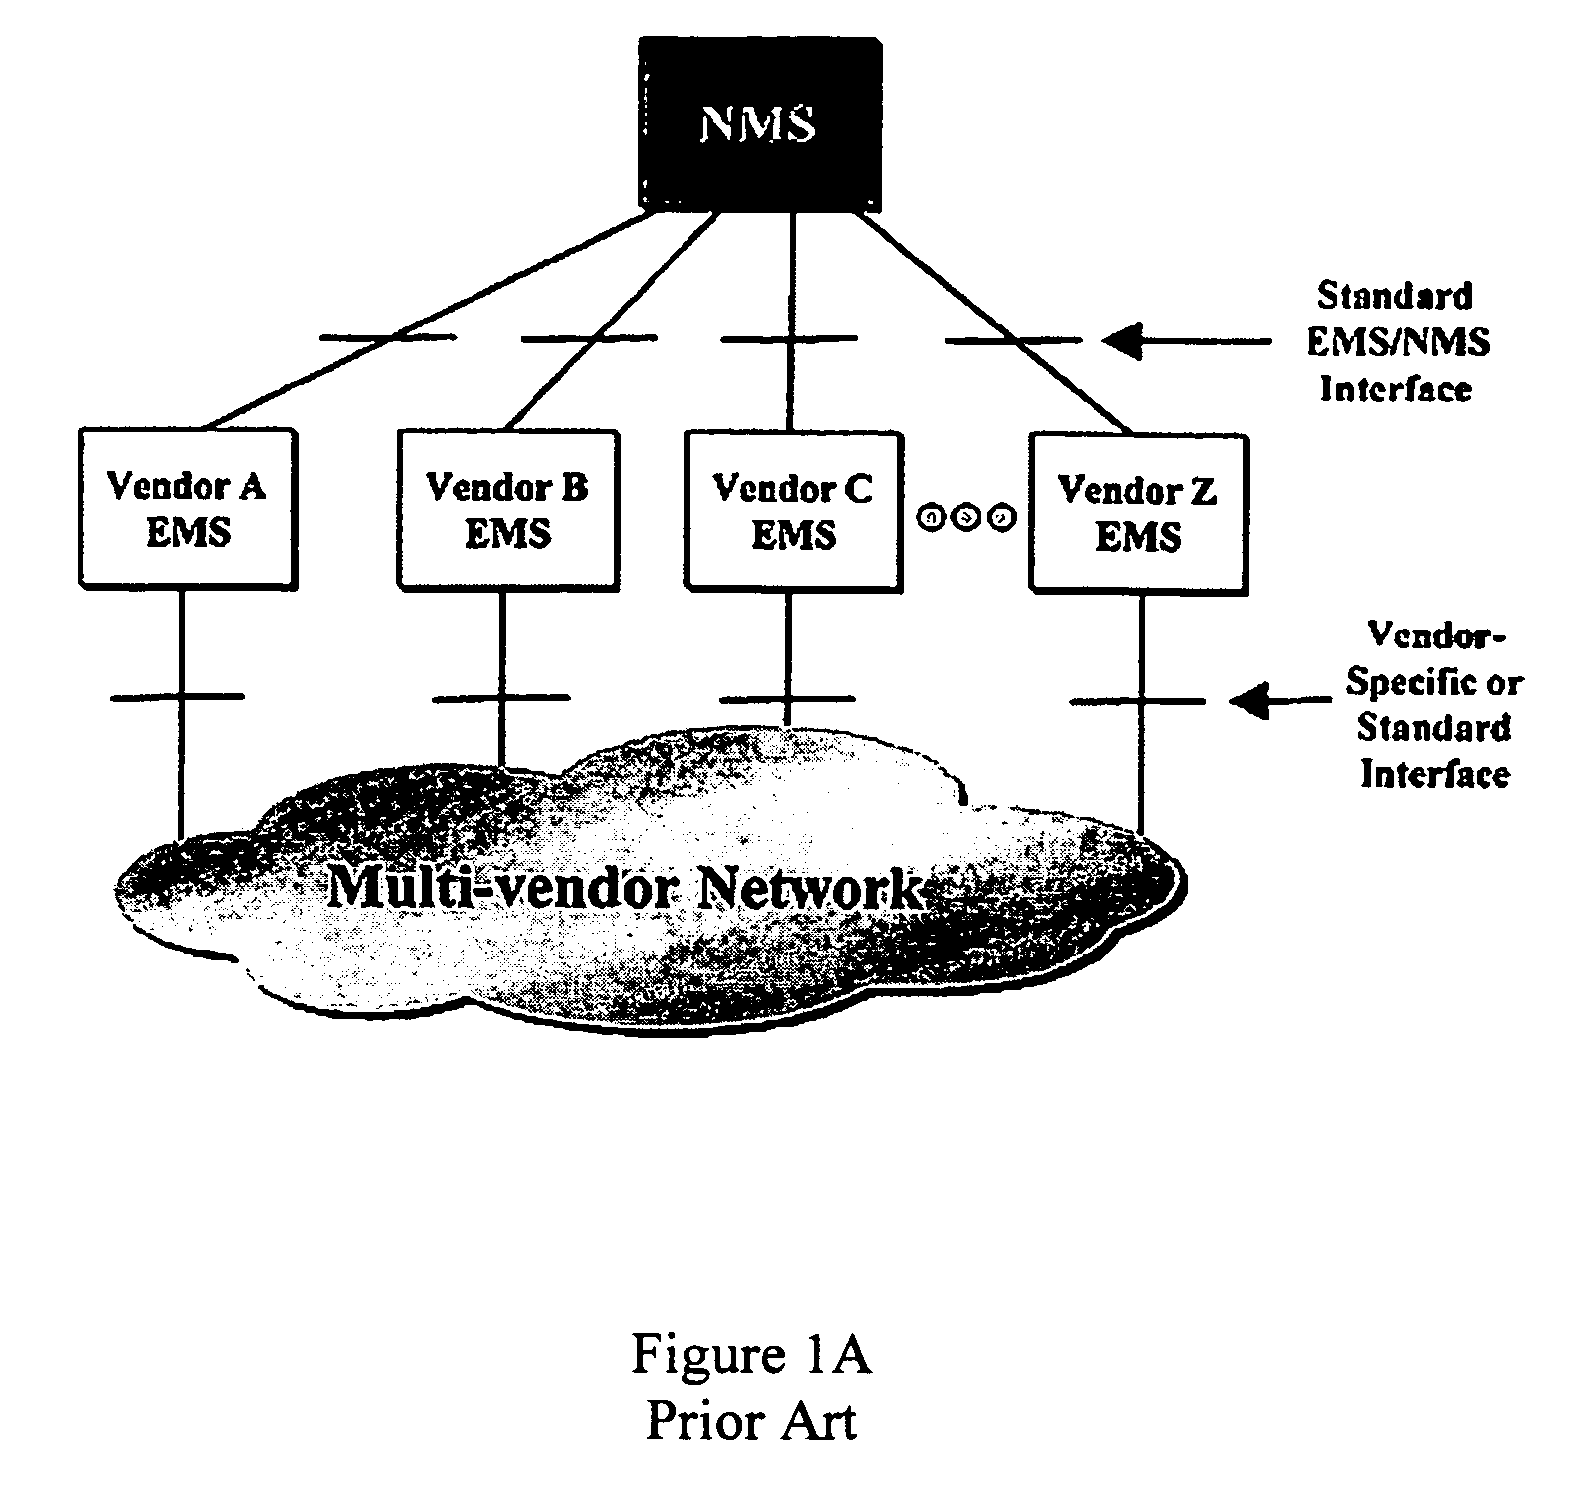 Element management system with automatic remote backup of network elements' local storage